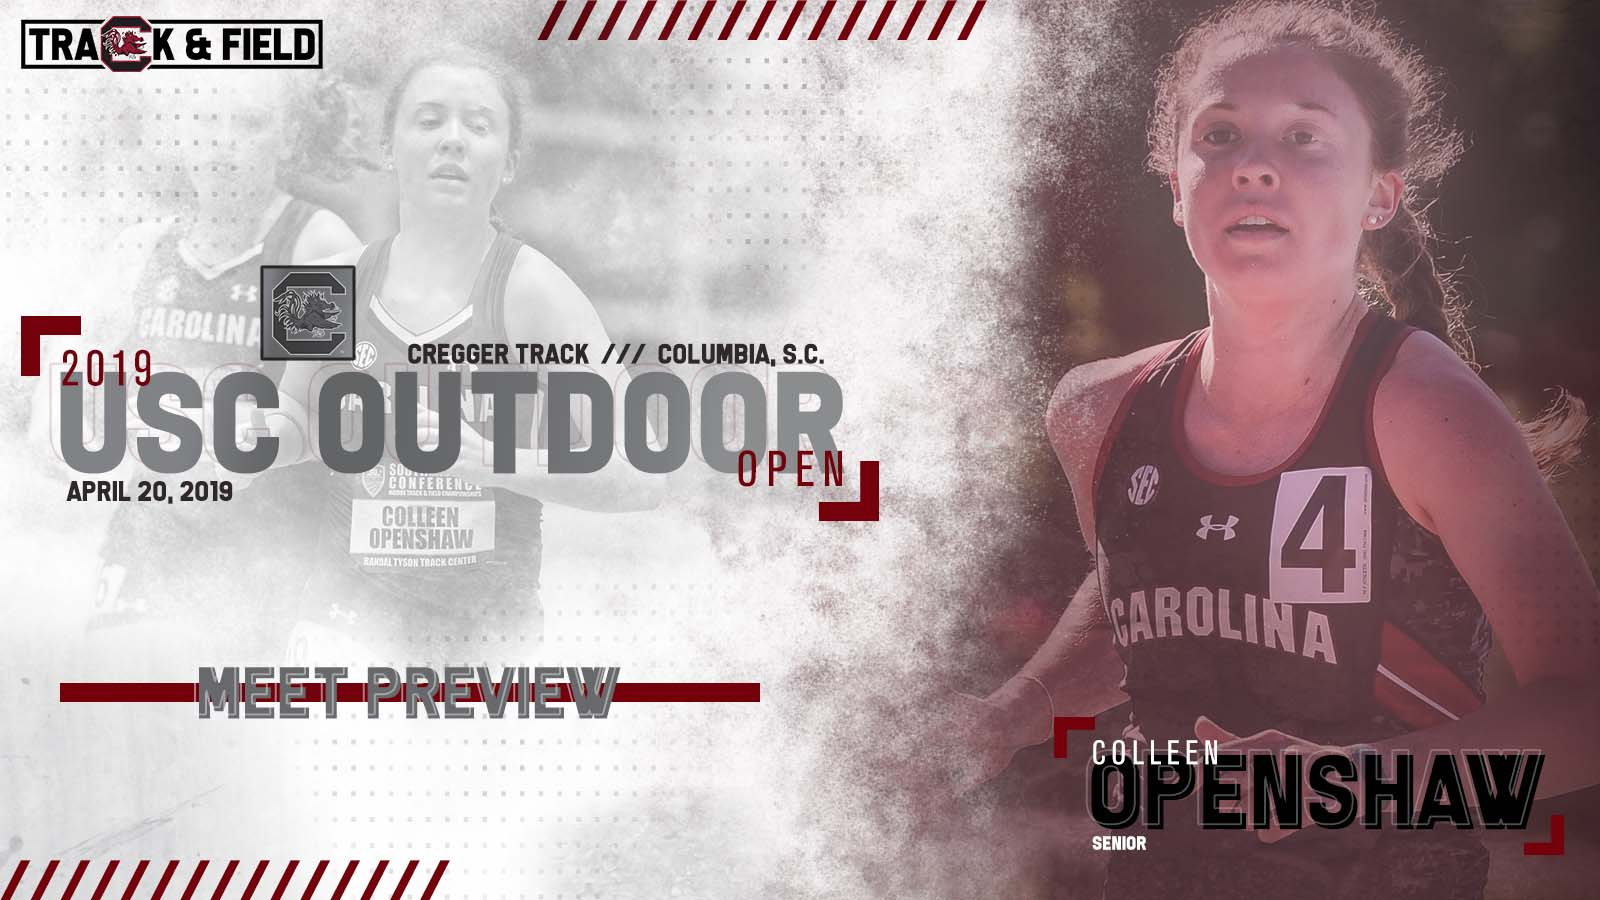 Gamecocks Close Home Schedule, Honor Seniors at USC Outdoor Open